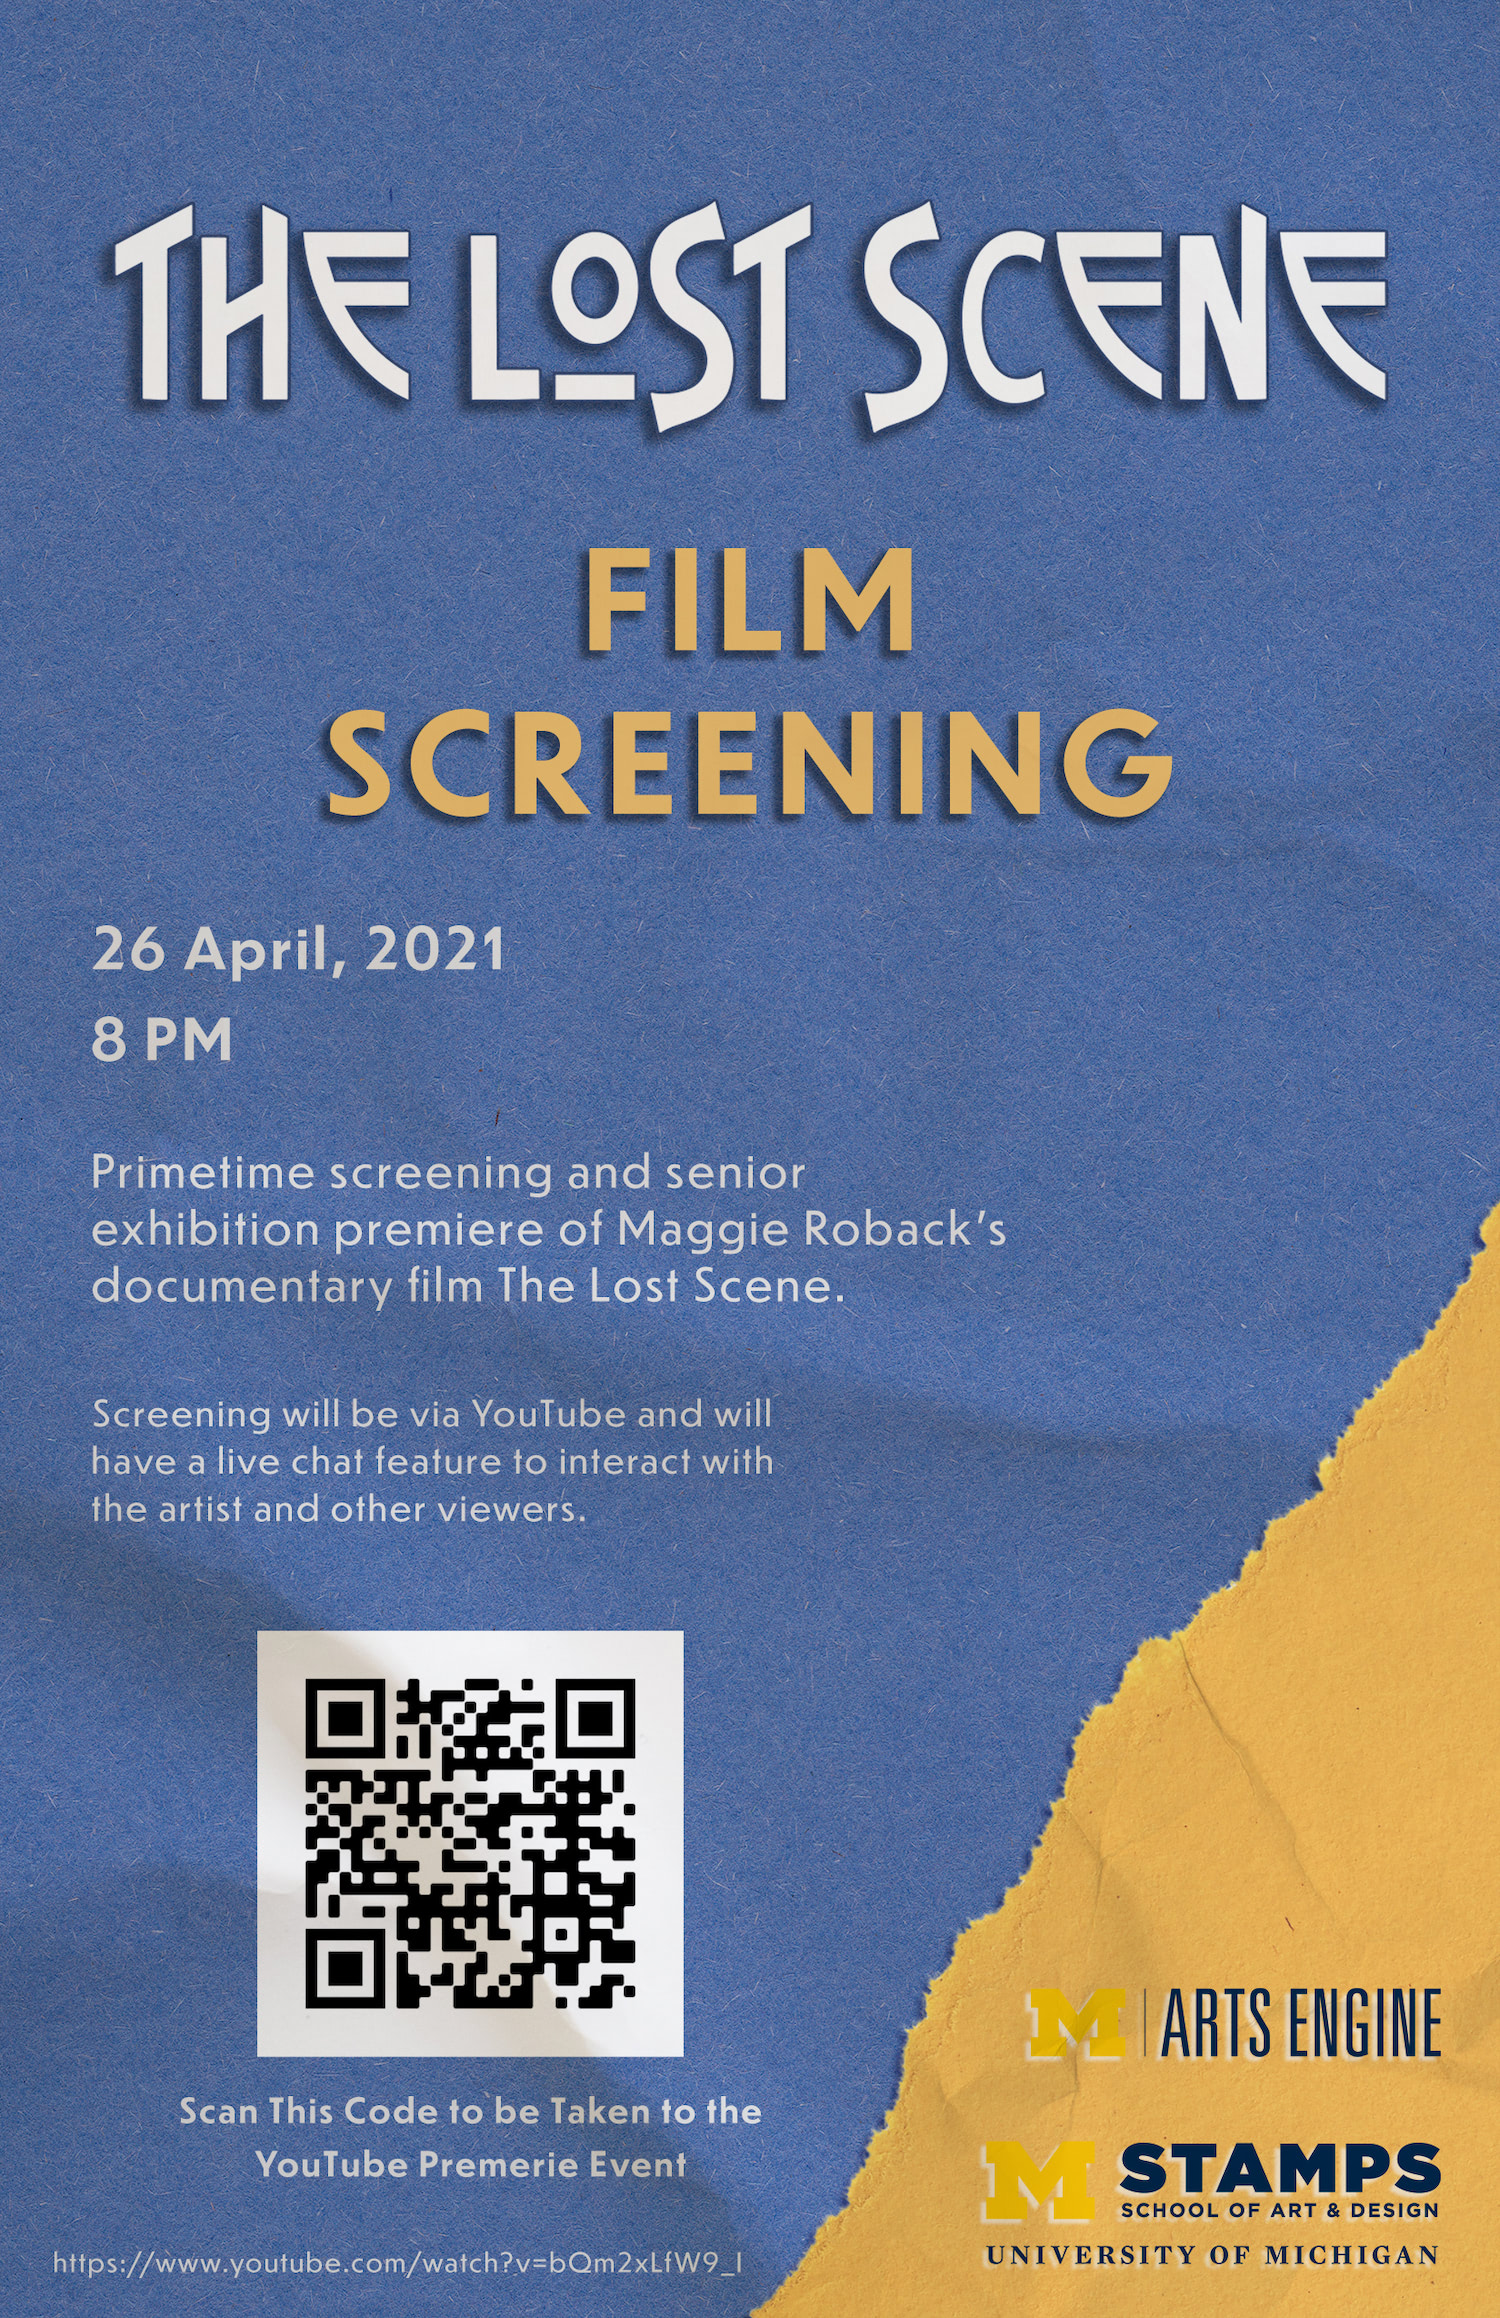 Information for a film screening typed on textured construction paper